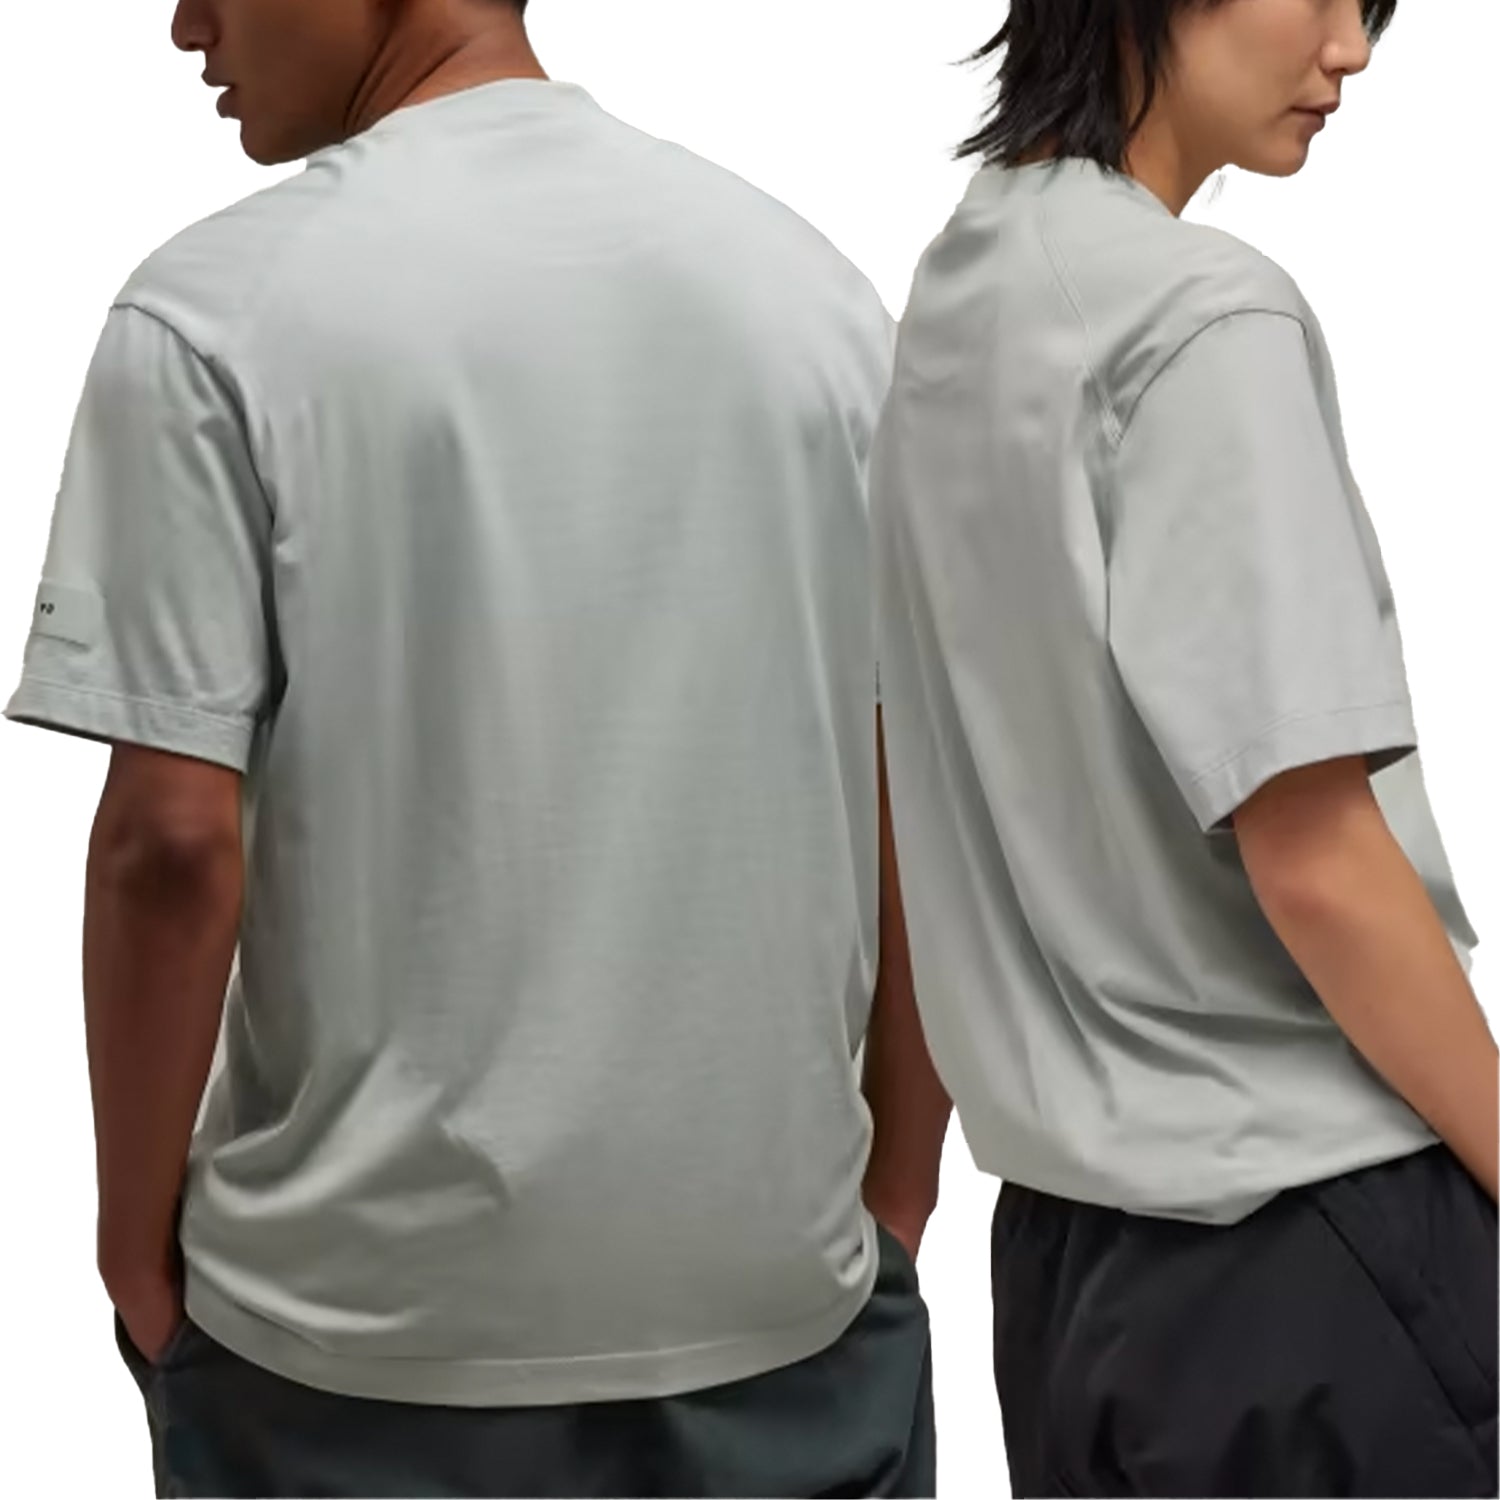 Y-3 Relaxed T-Shirt - INVINCIBLE